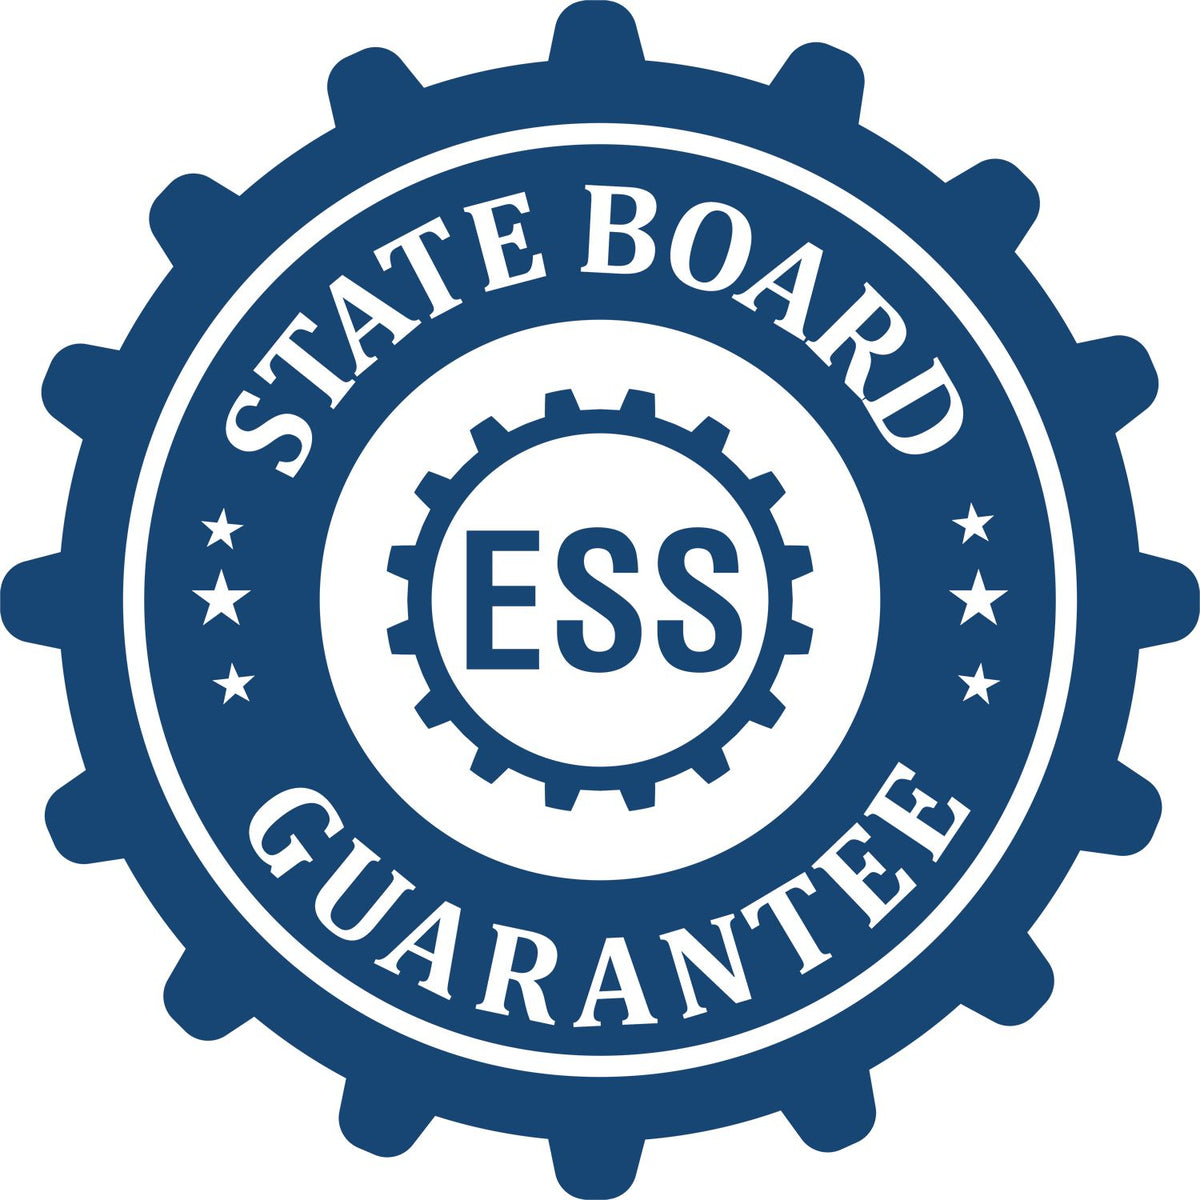 An emblem in a gear shape illustrating a state board guarantee for the Rhode Island Professional Engineer Seal Stamp product.